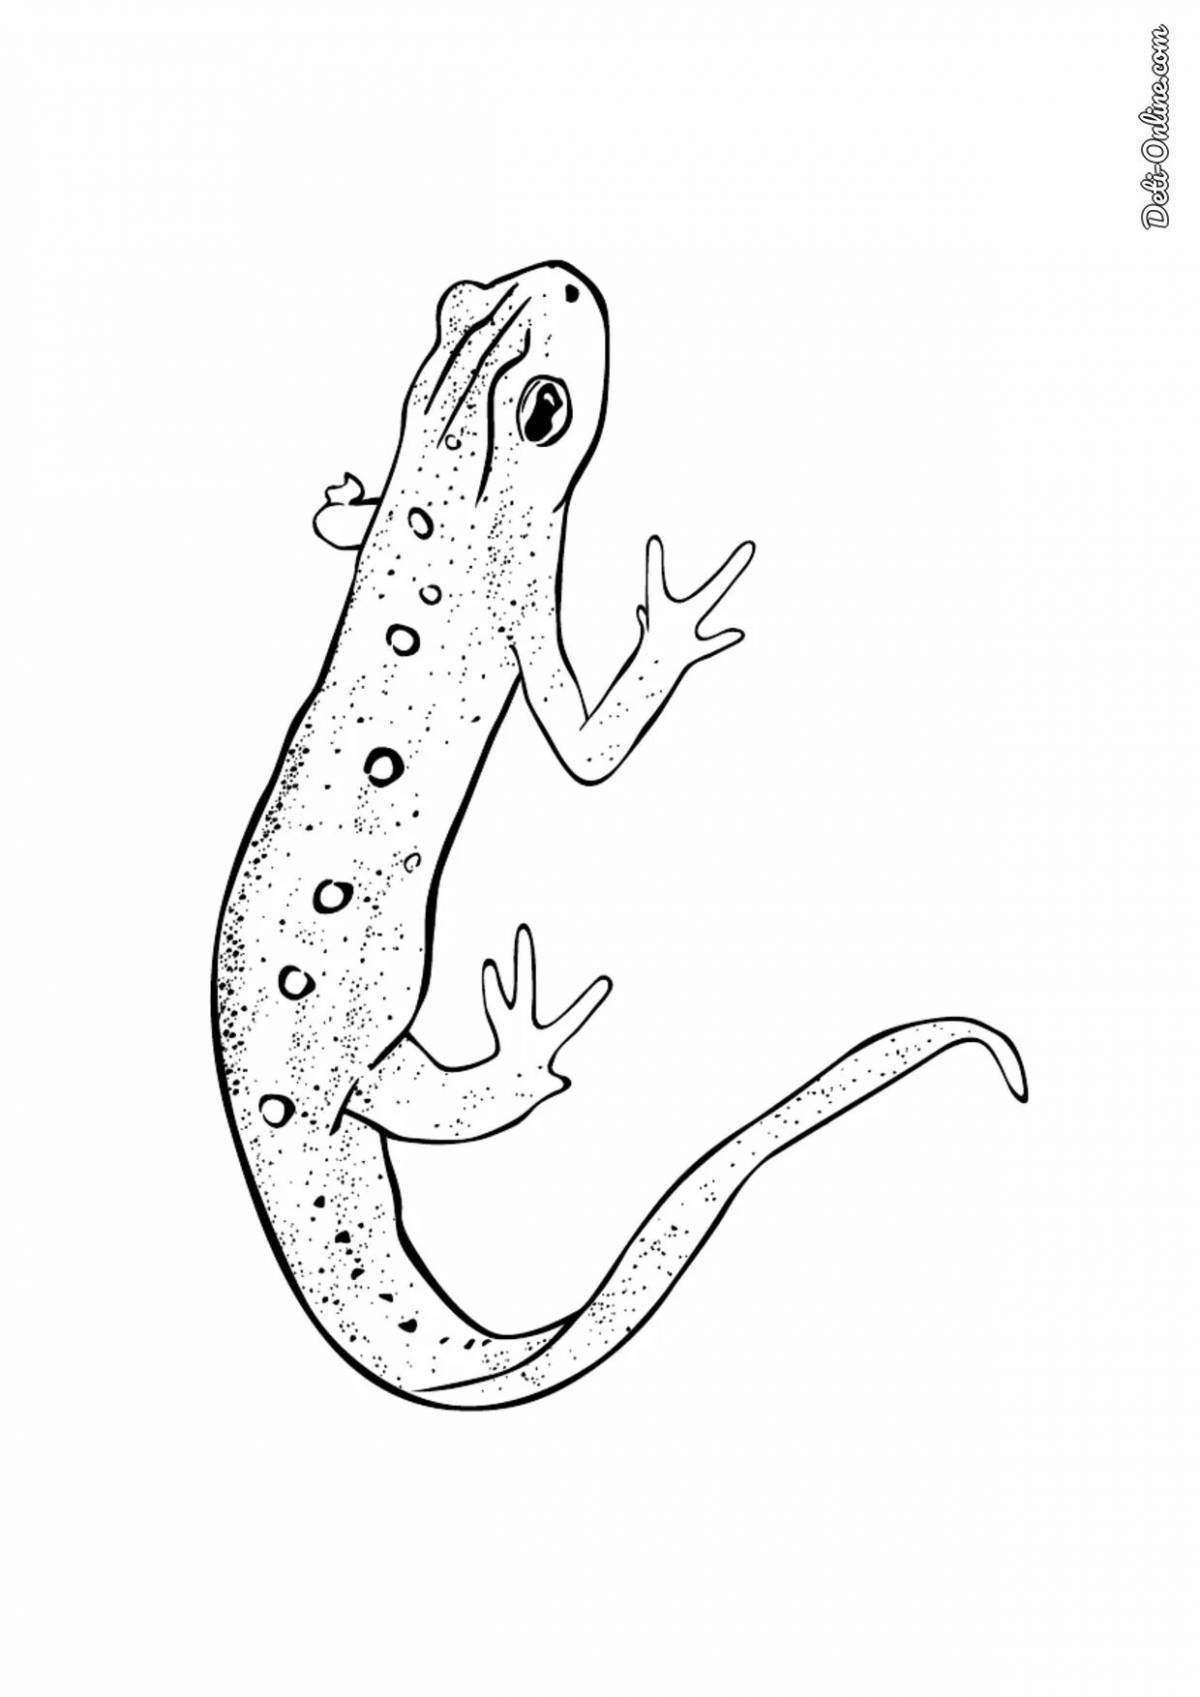 Comic coloring of the common newt